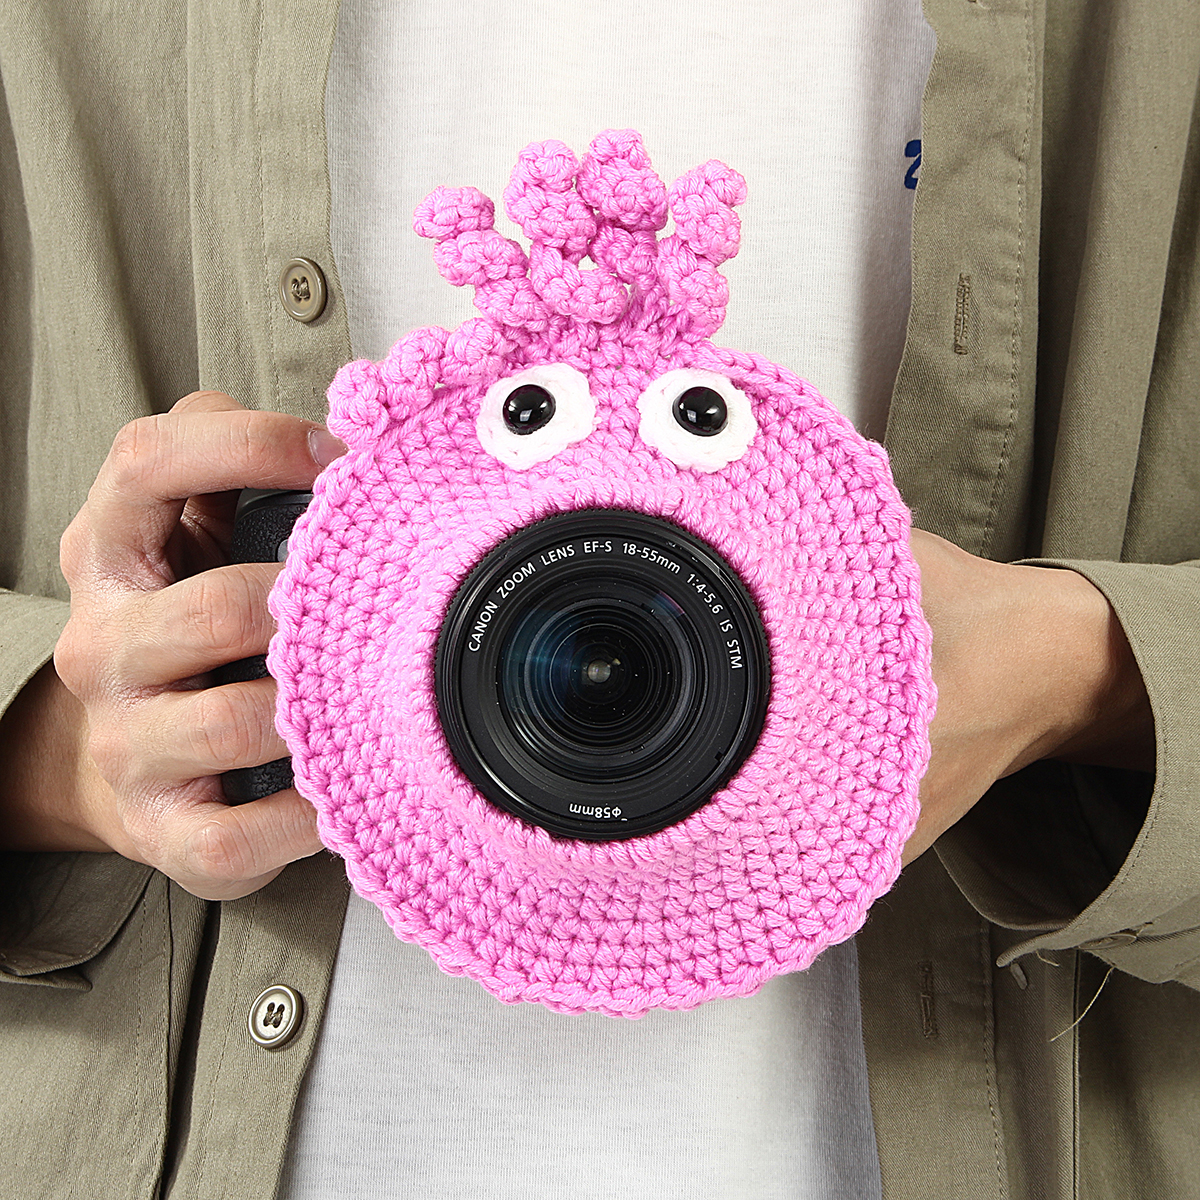 Hand-knitted-Wool-Decor-Case-For-Camera-Lens-Decorative-Photo-Guide-Doll-Toys-For-Kids-1457648-4